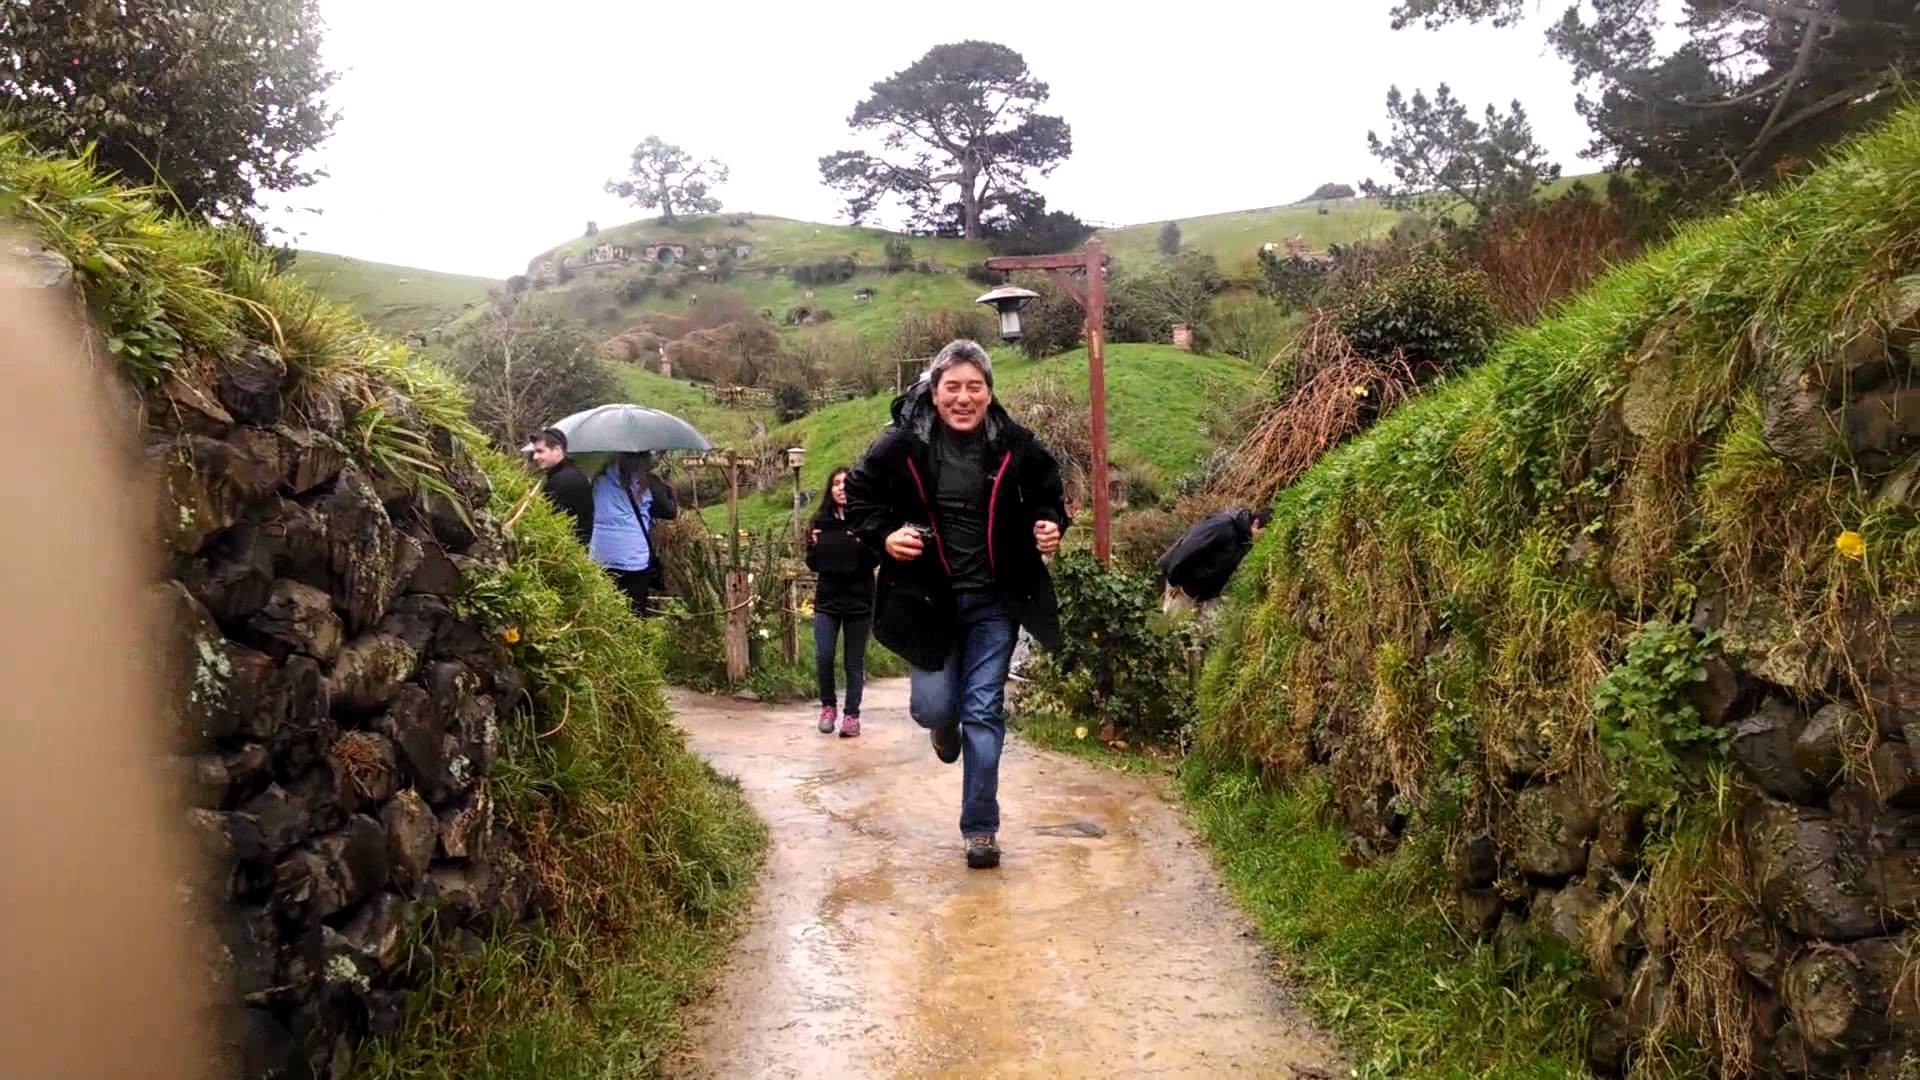 1920x1080 "I'm going on an adventure" at Hobbiton - YouTube